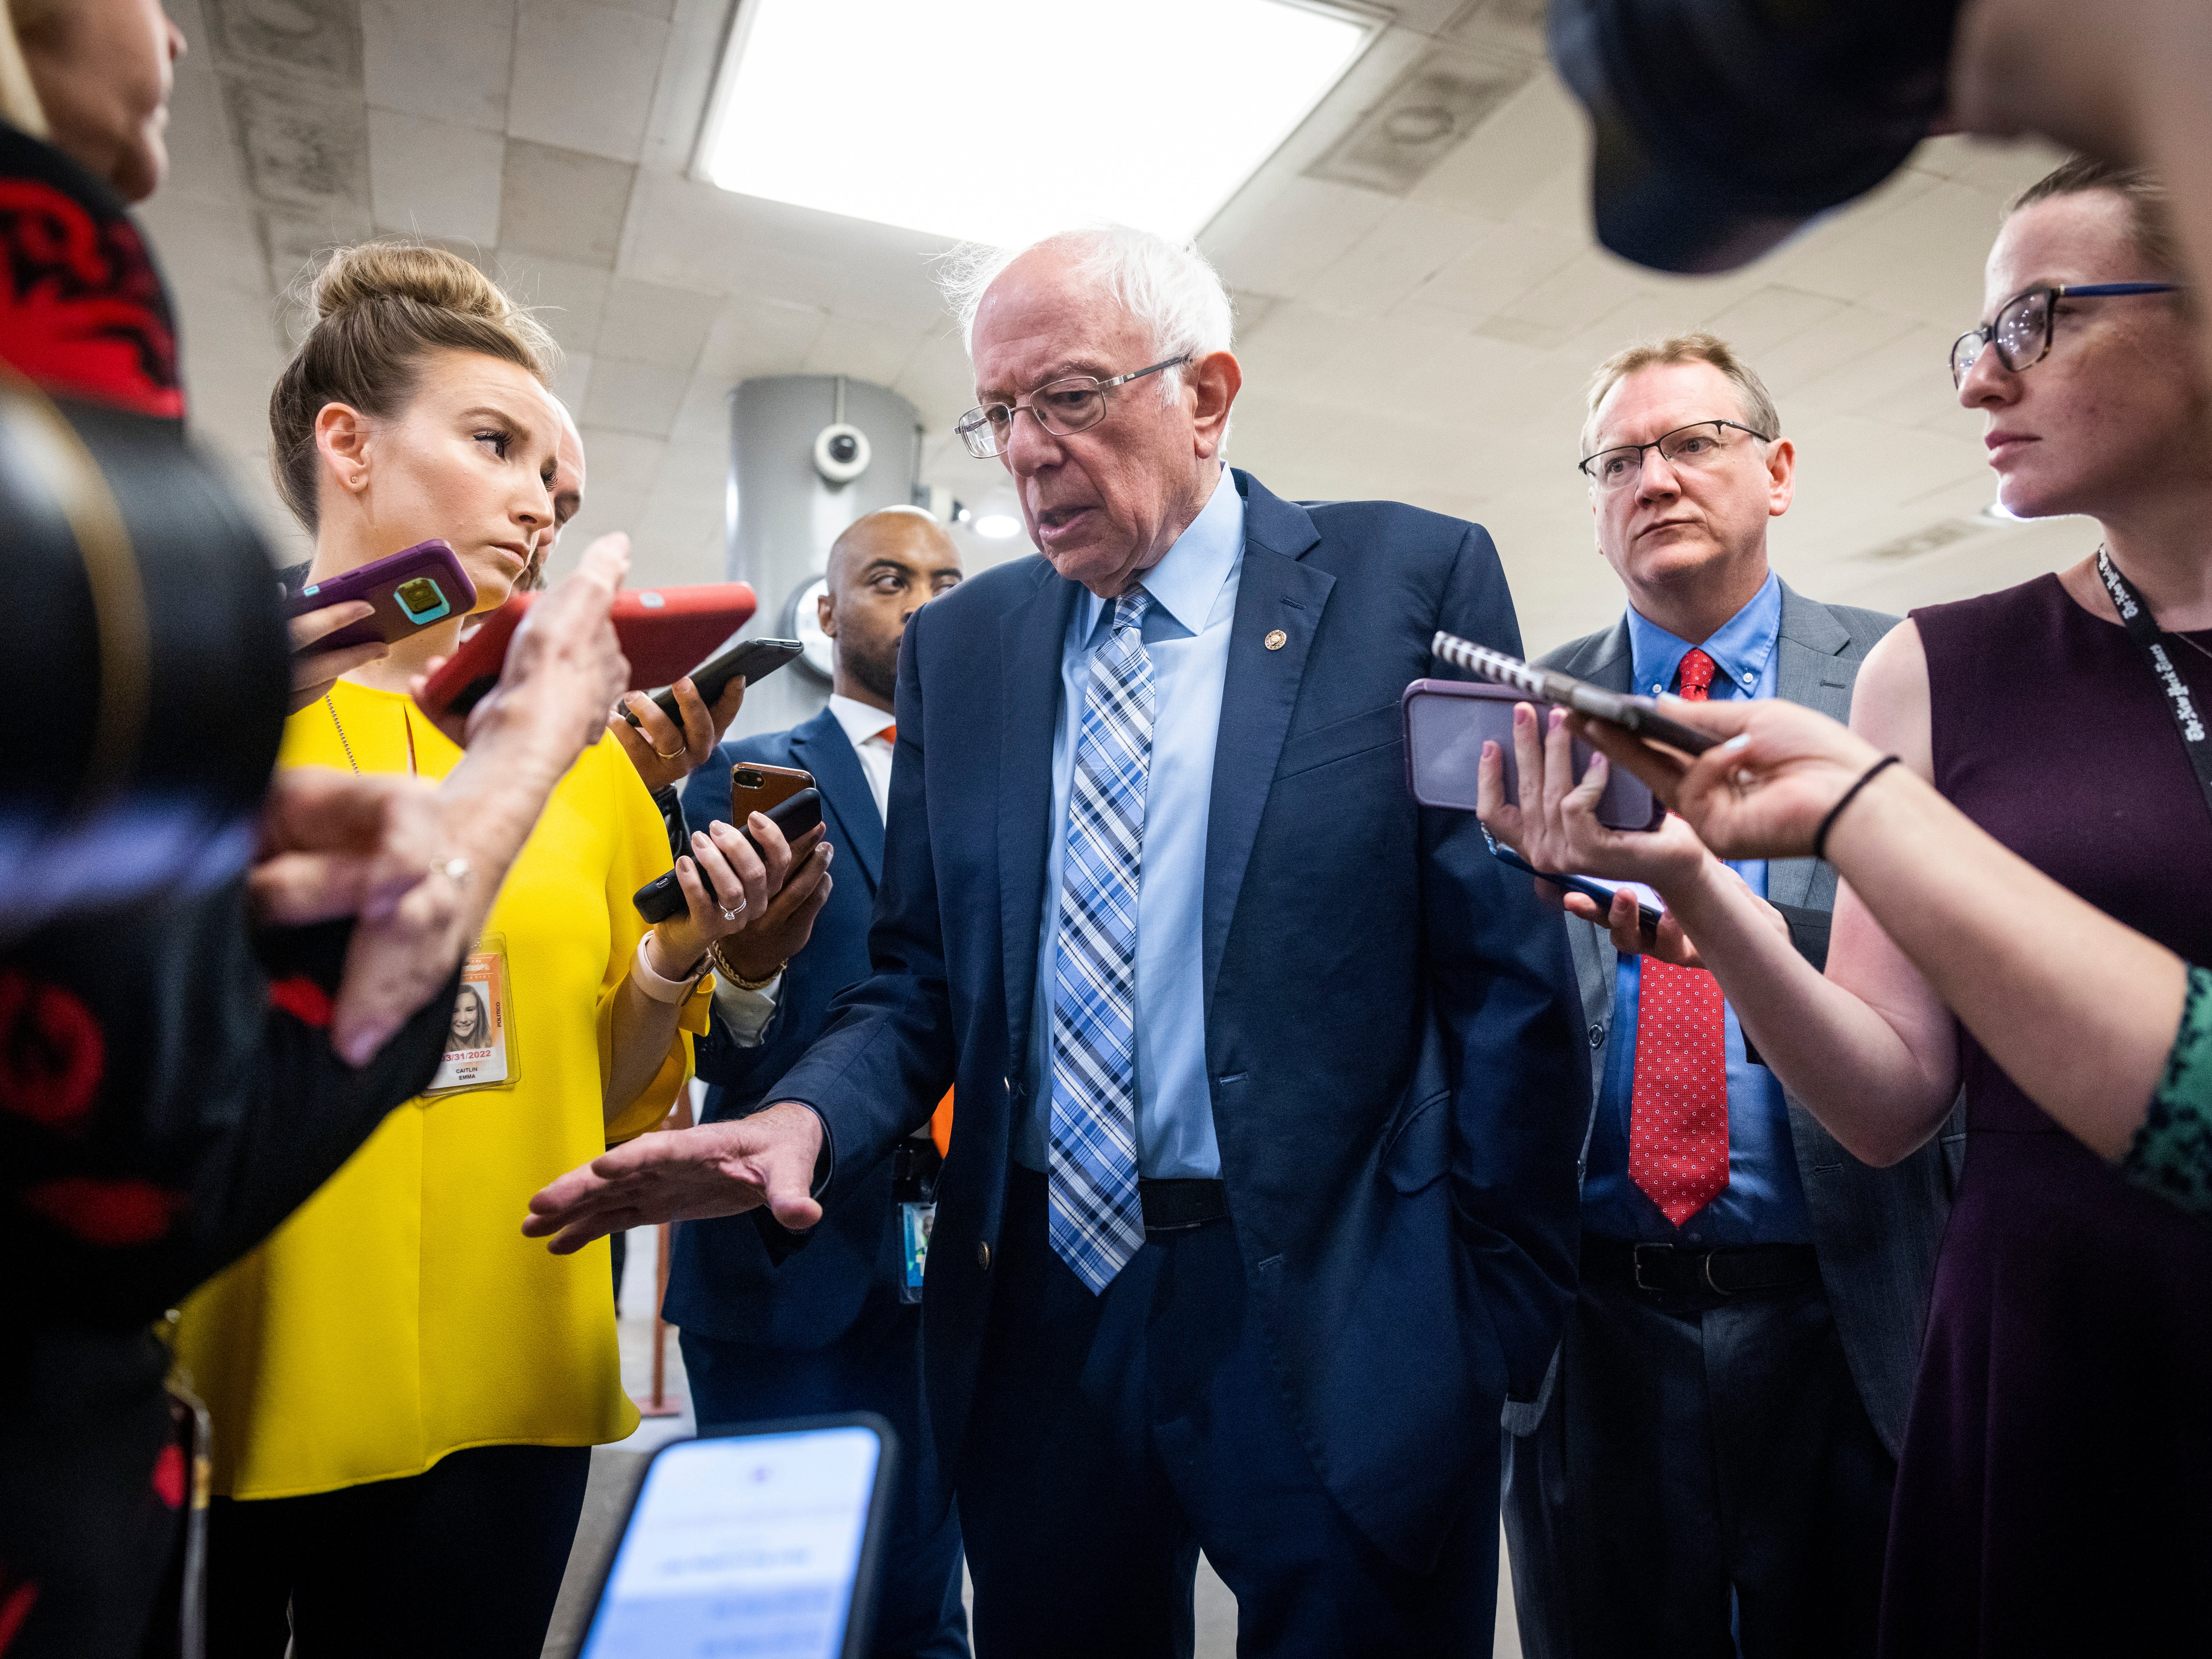 Reporters interview Independent Senator from Vermont Bernie Sanders on his way to the Senate Chamber for a vote in the US Capitol in Washington DC, USA, 16 June 2021.